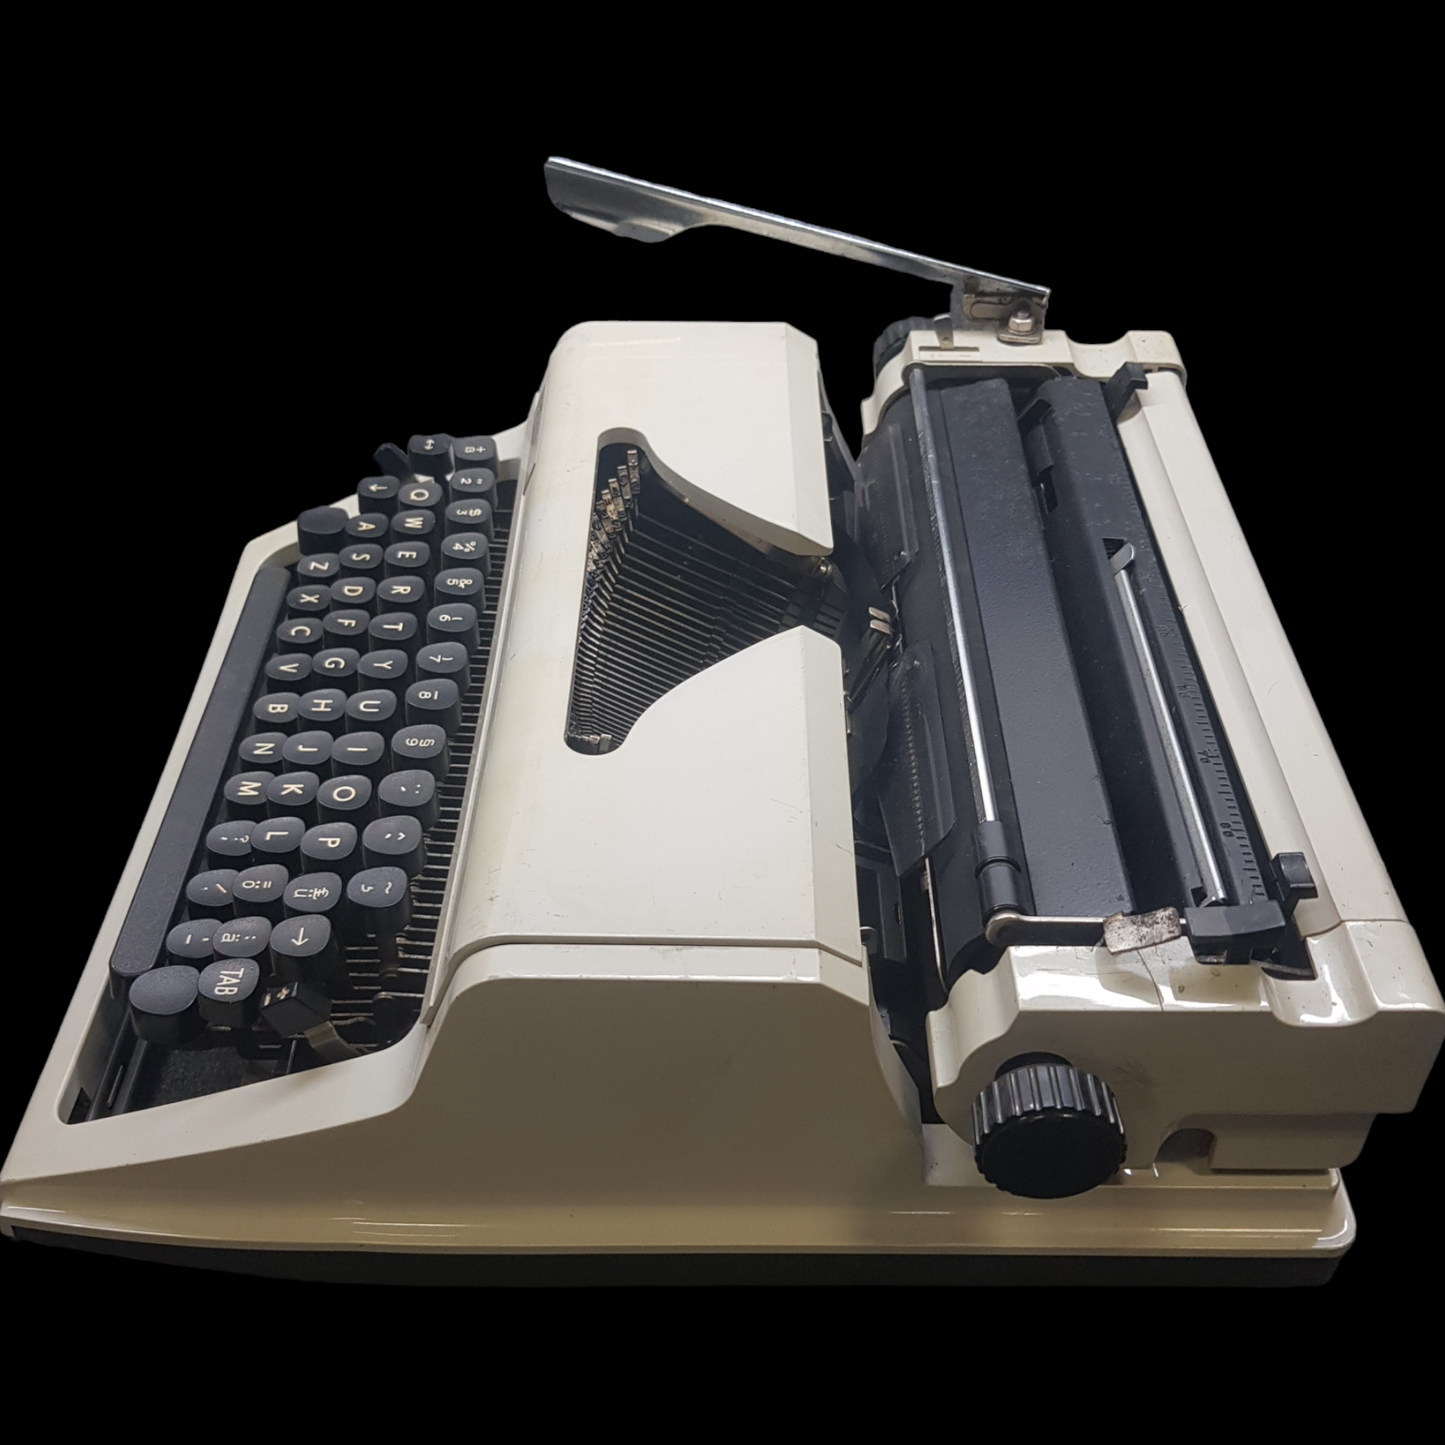 Image of Erika Model 42 Typewriter. Fibre body. Made in Germany. Available from universaltypewritercompany.in.